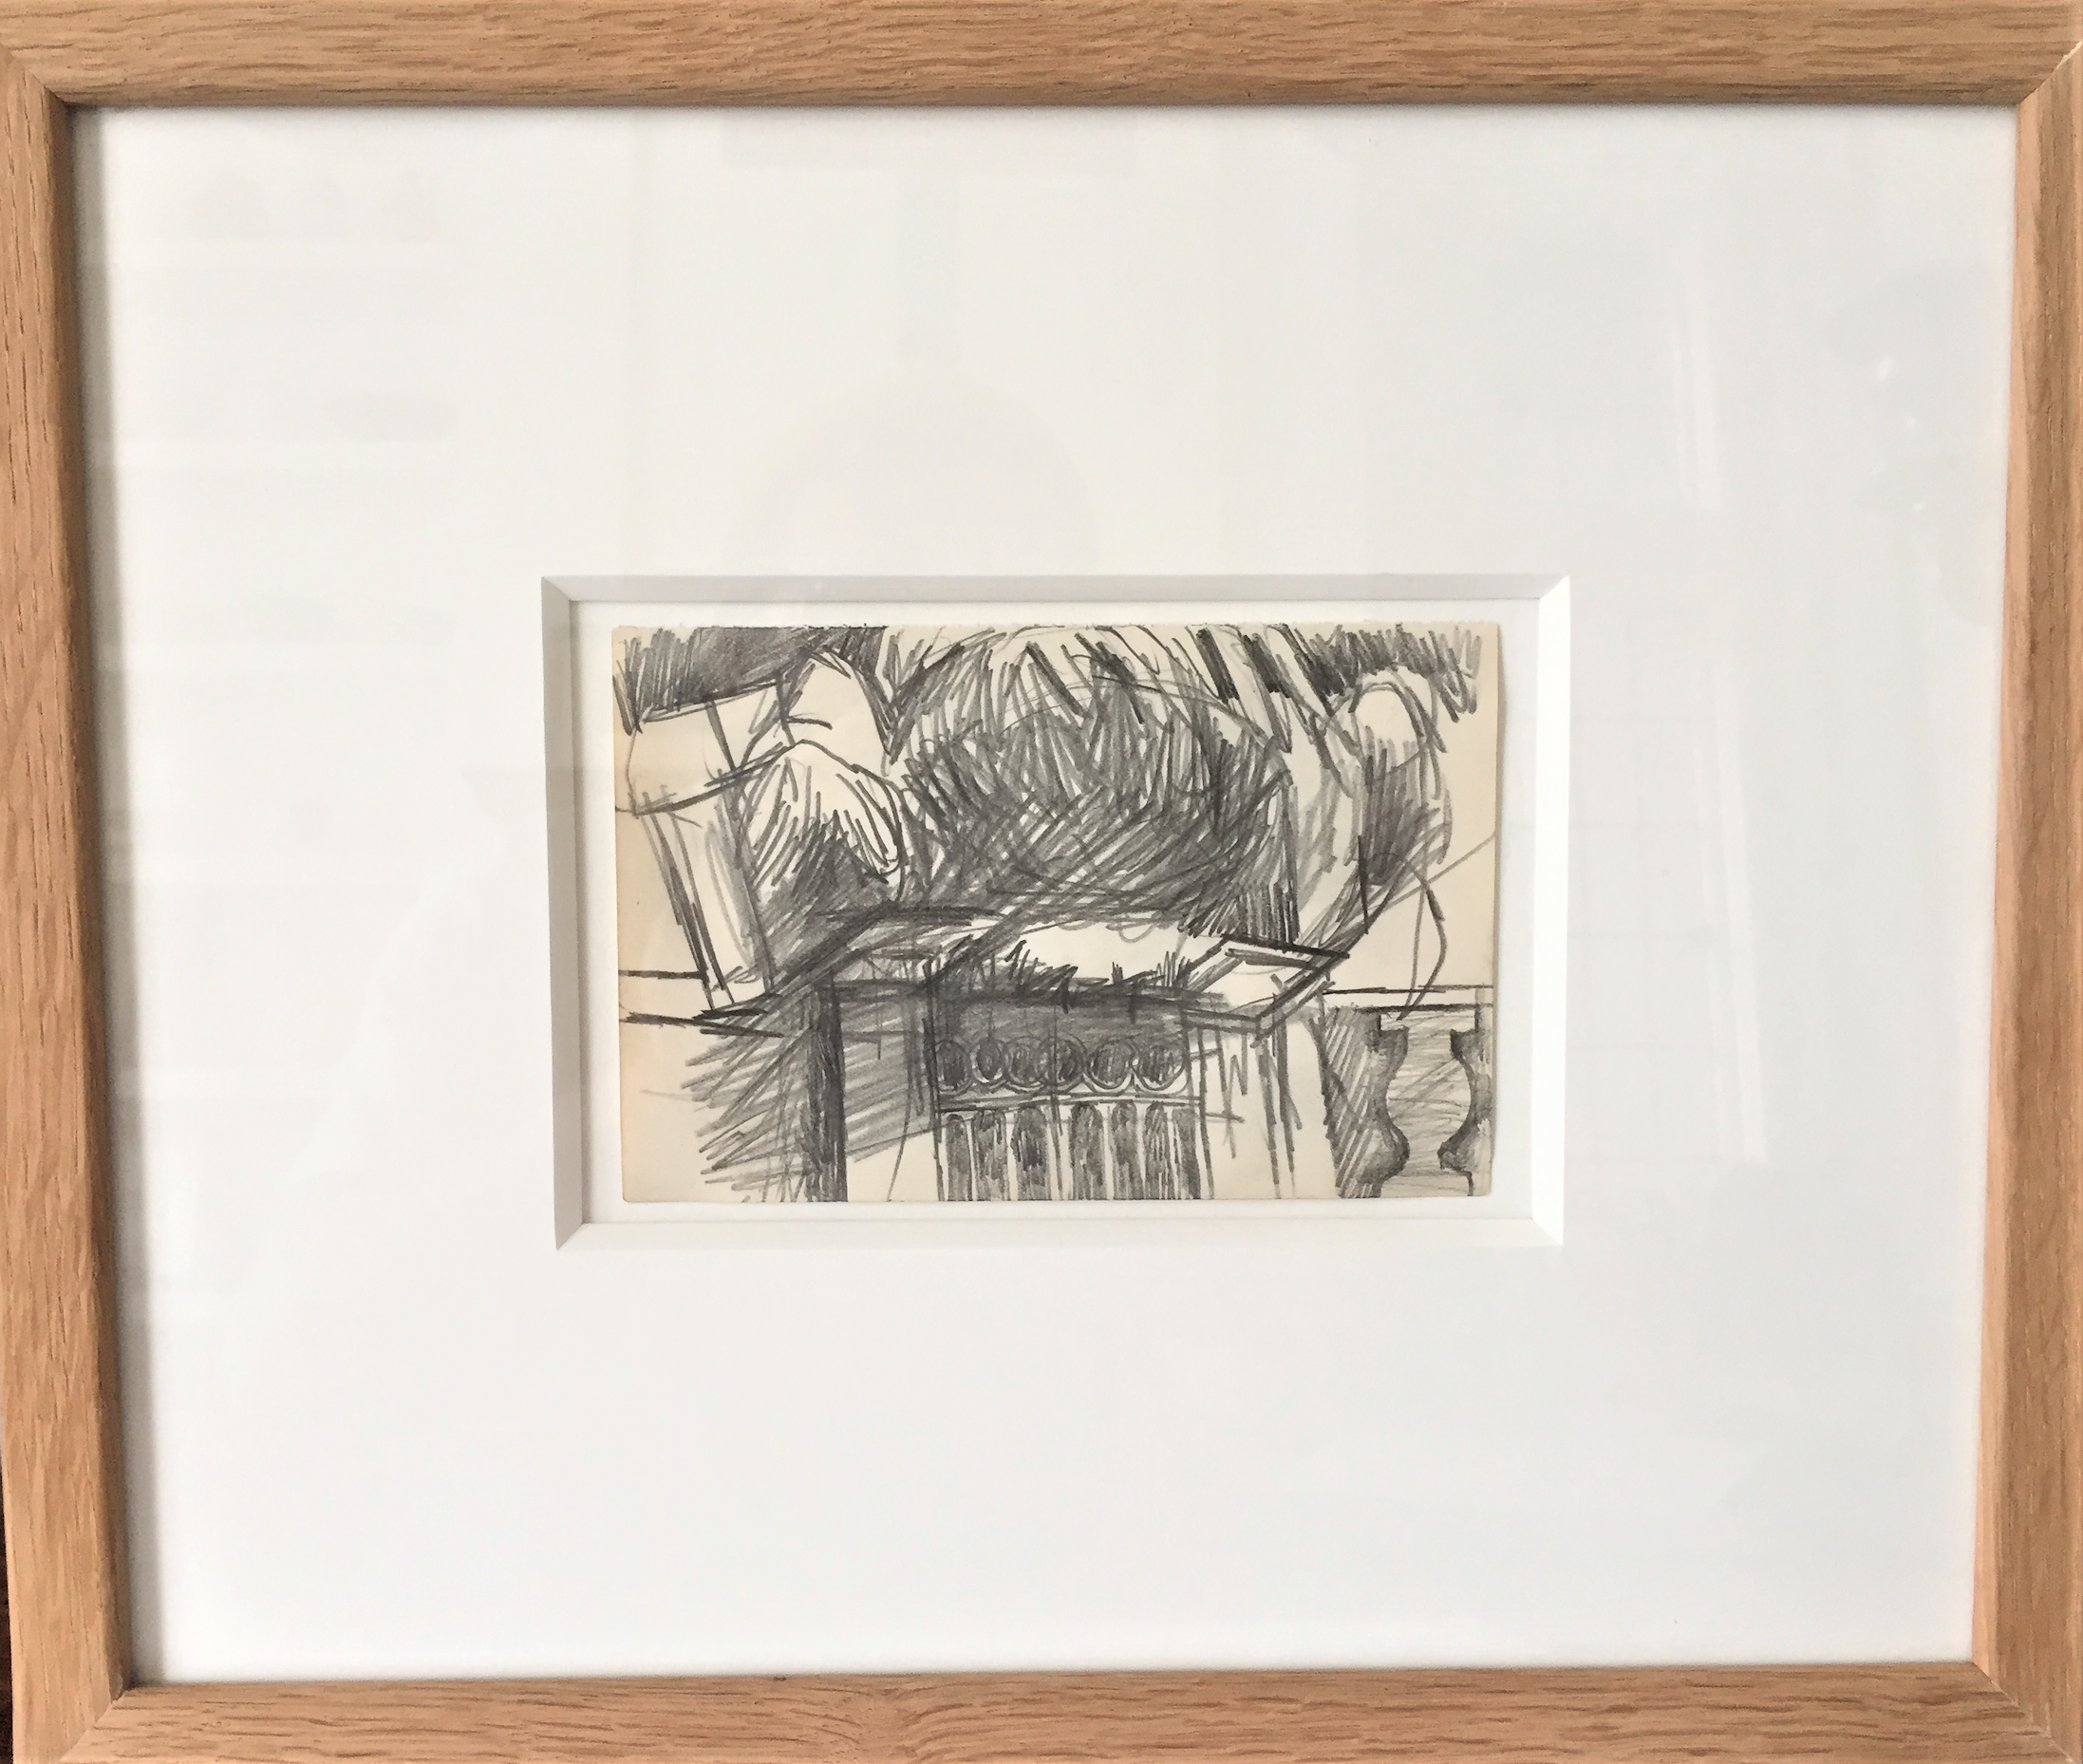 KEITH VAUGHAN [1912-77]. Garden Gate, 1951. pencil on paper; studio stamp signature on reverse. - Image 2 of 2